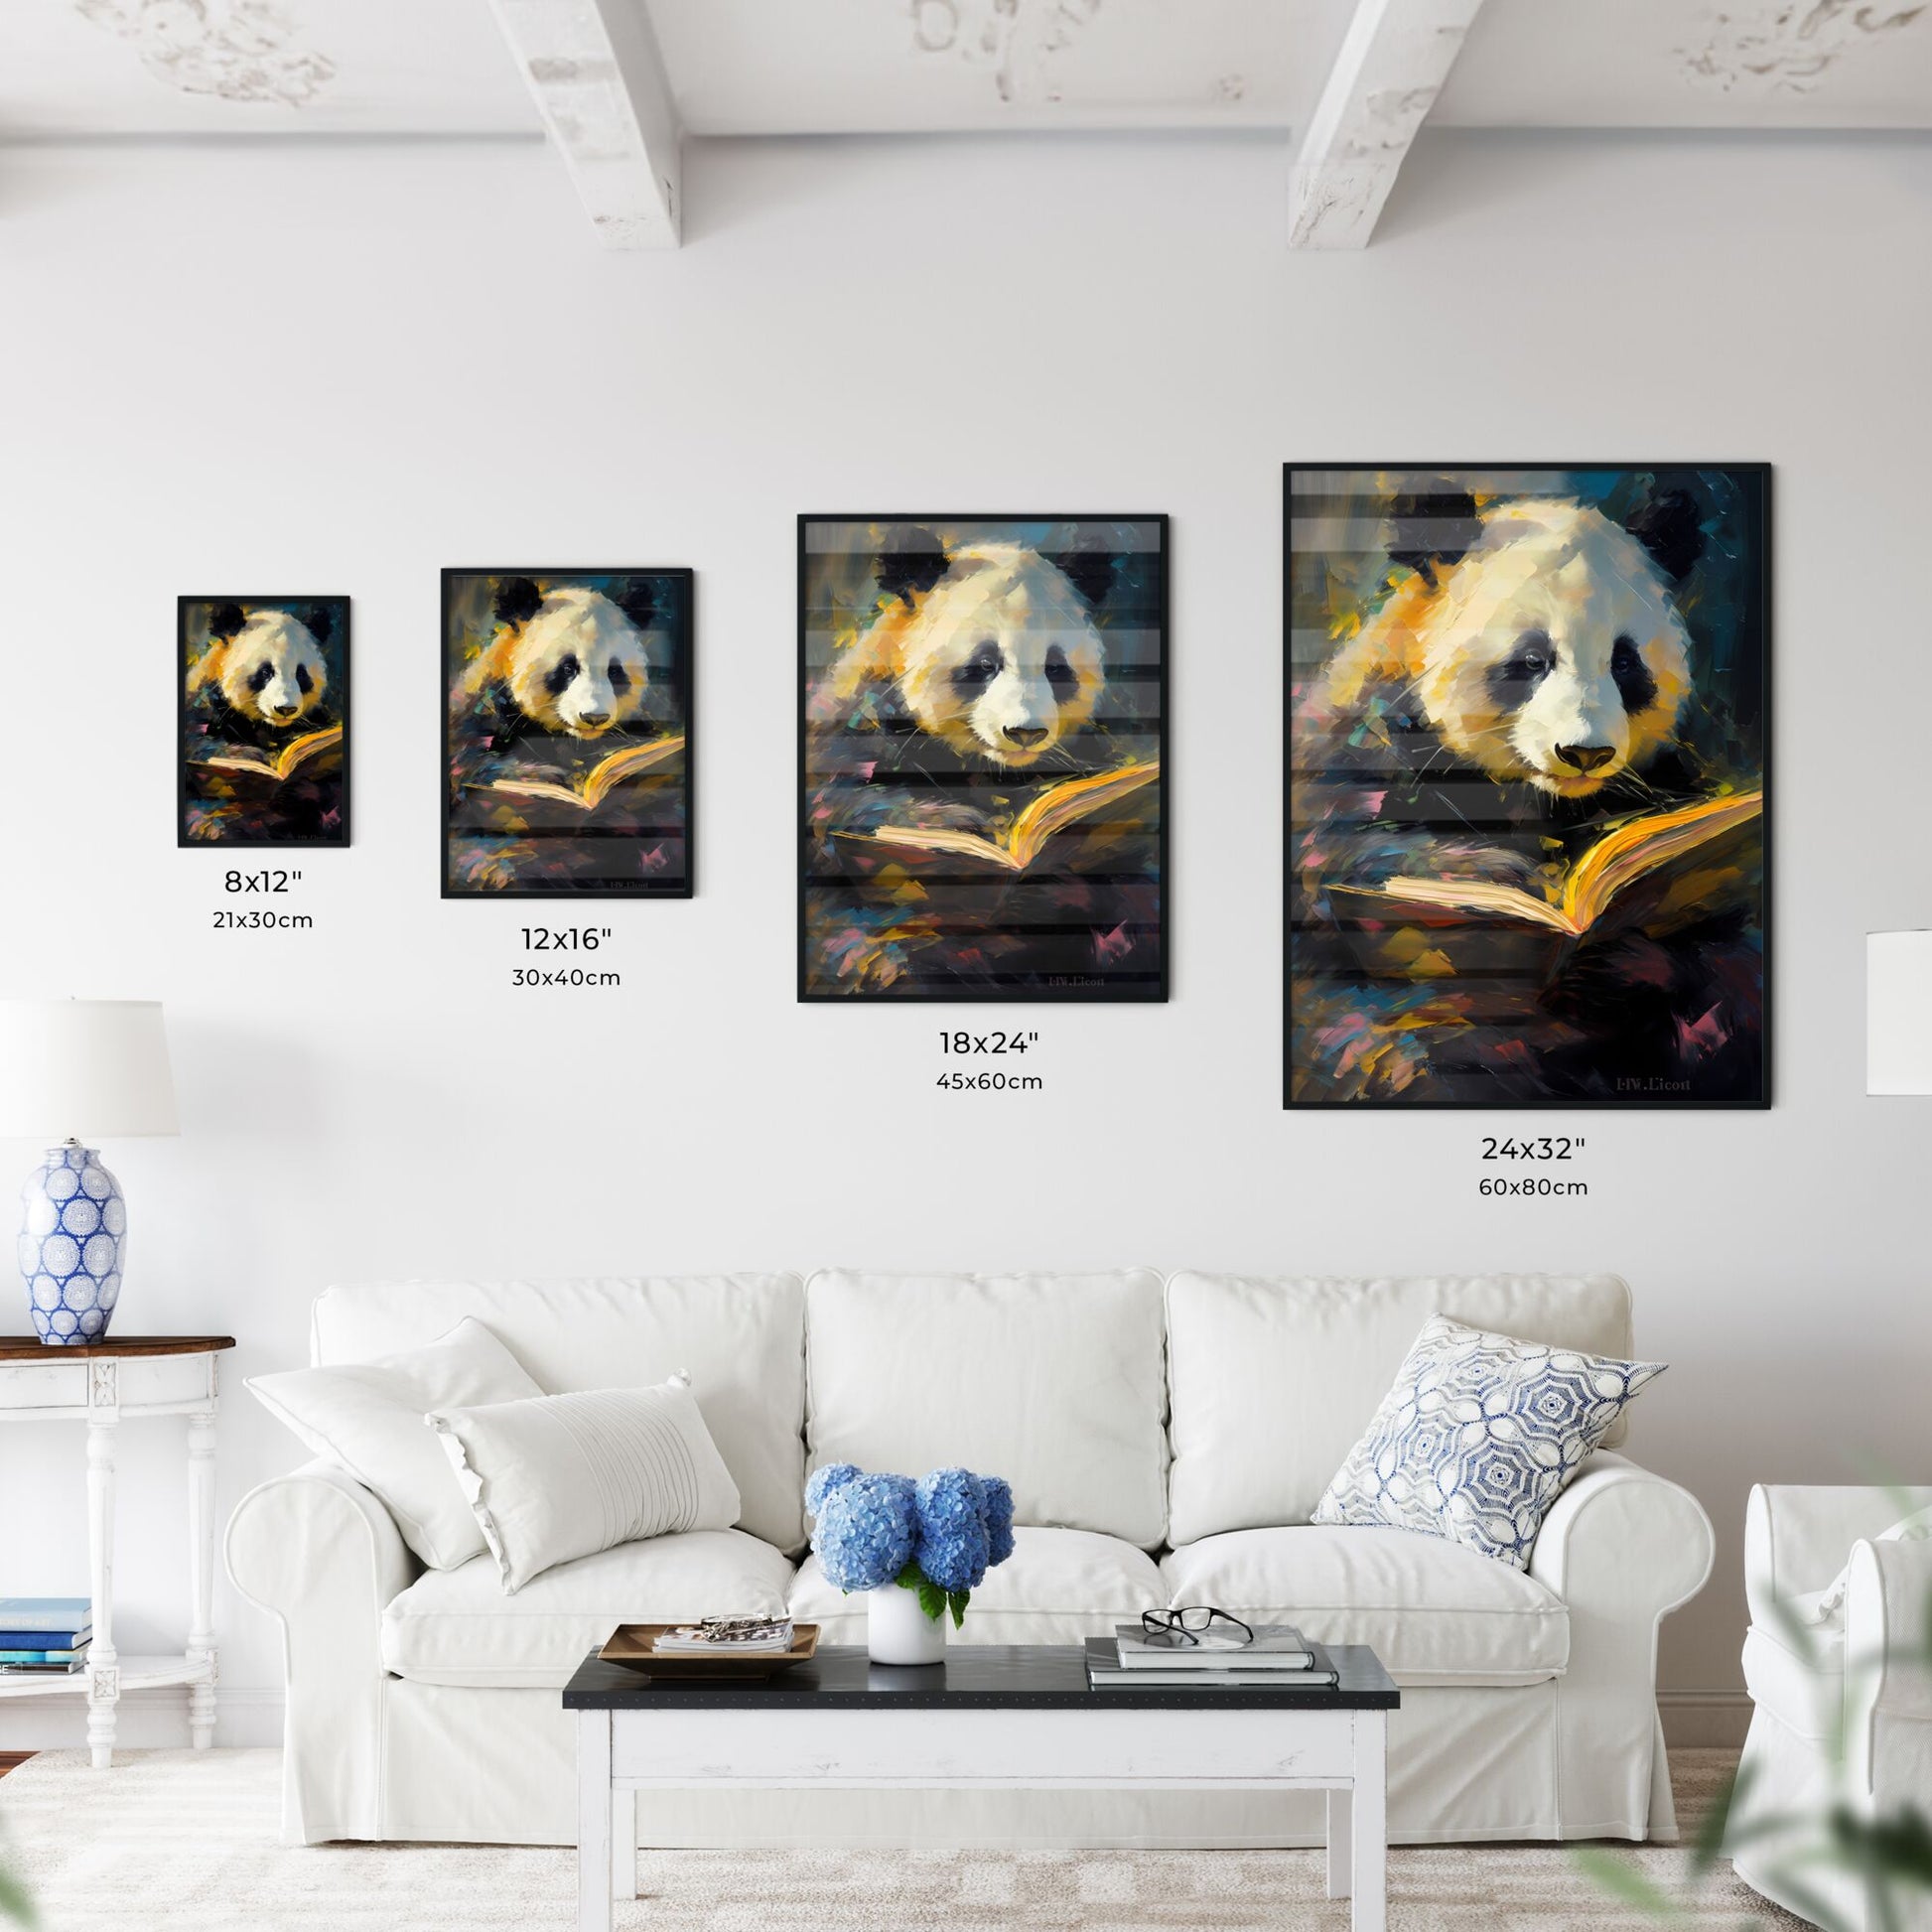 A Poster of the book panda - A Panda Reading A Book Default Title